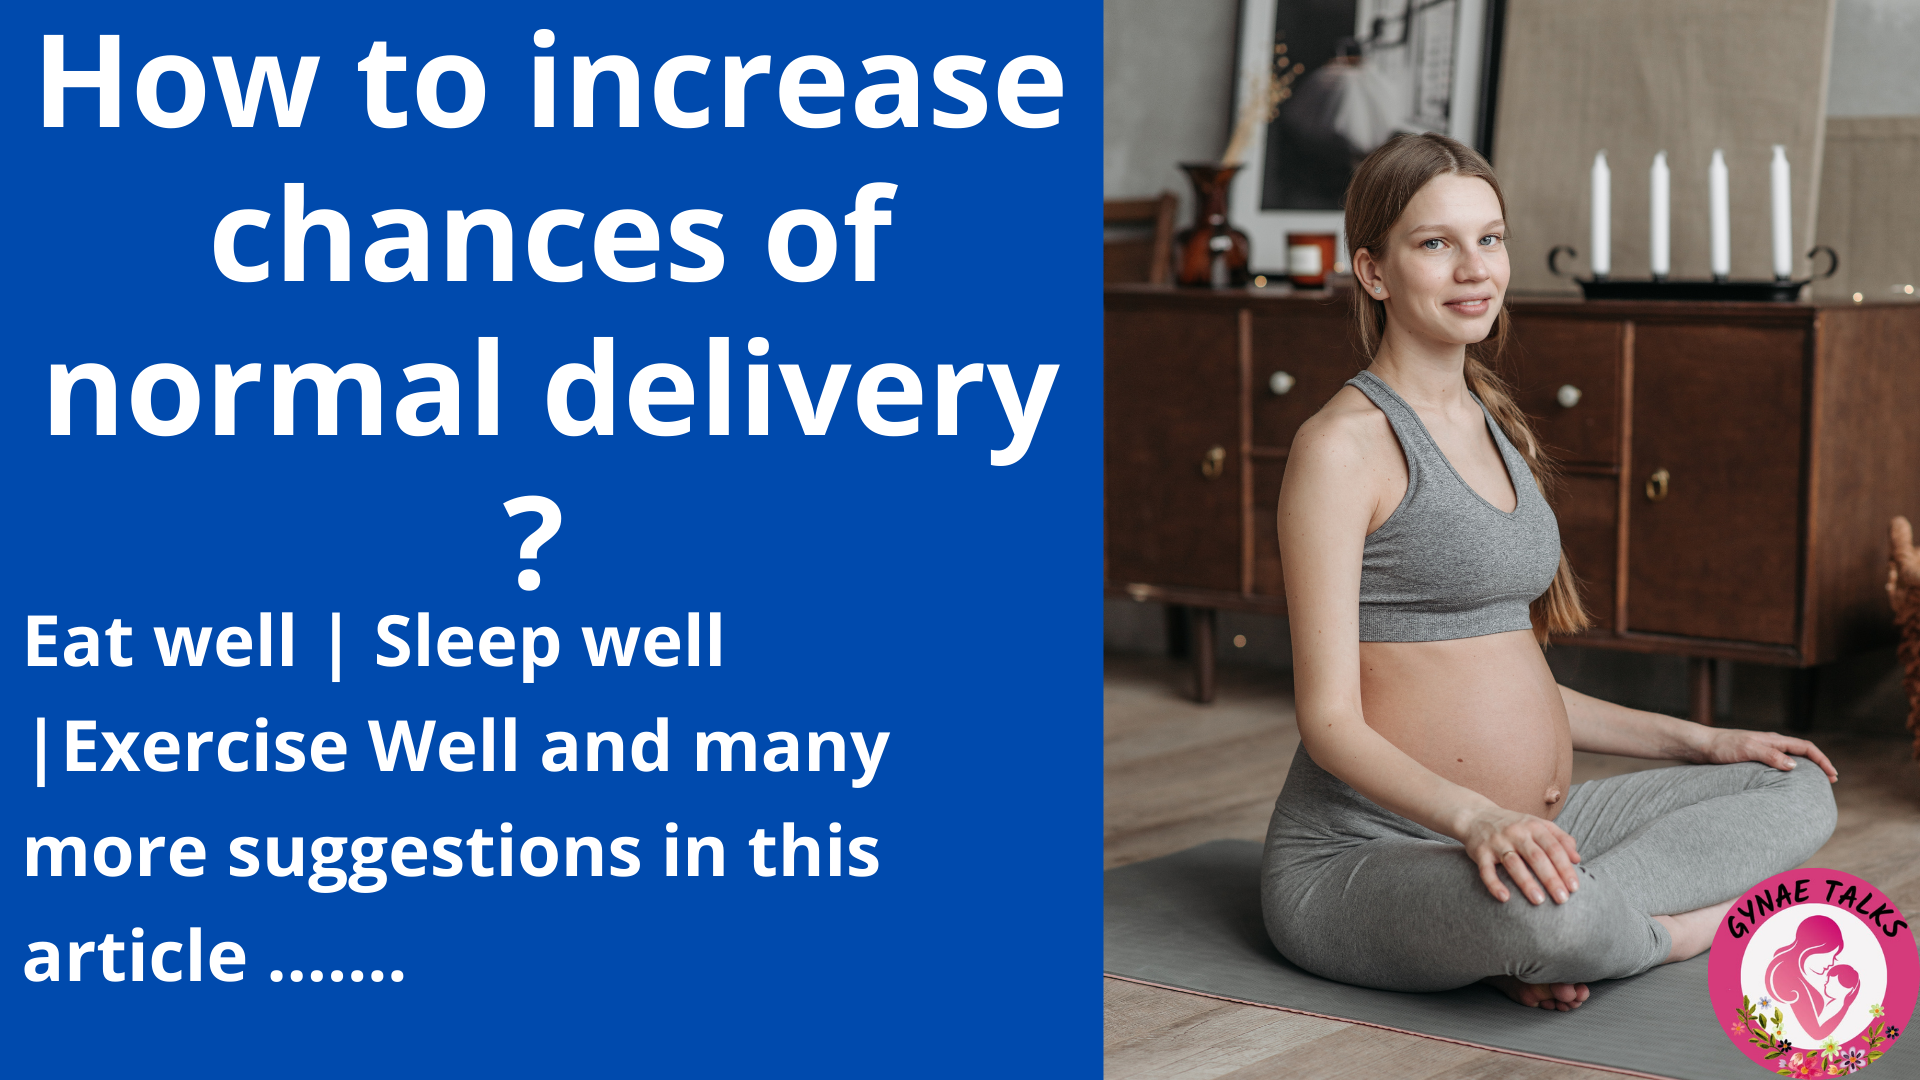 Tips for normal delivery